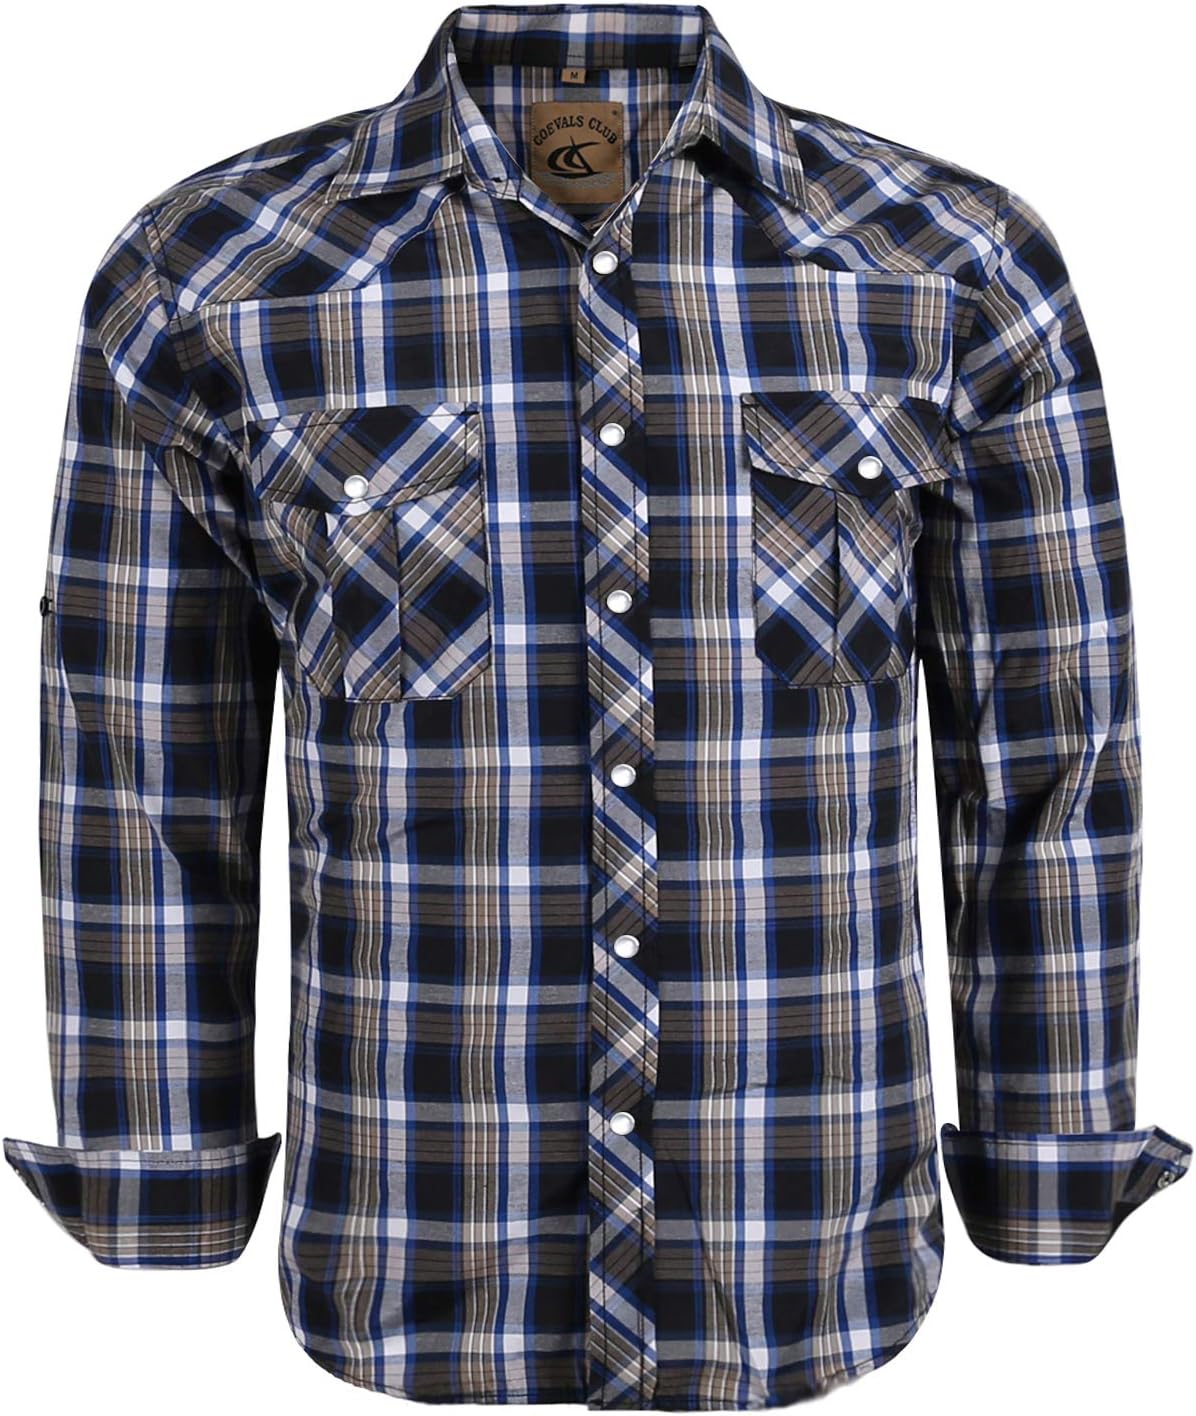  COEVALS CLUB Men's Long Sleeve Casual Western Two